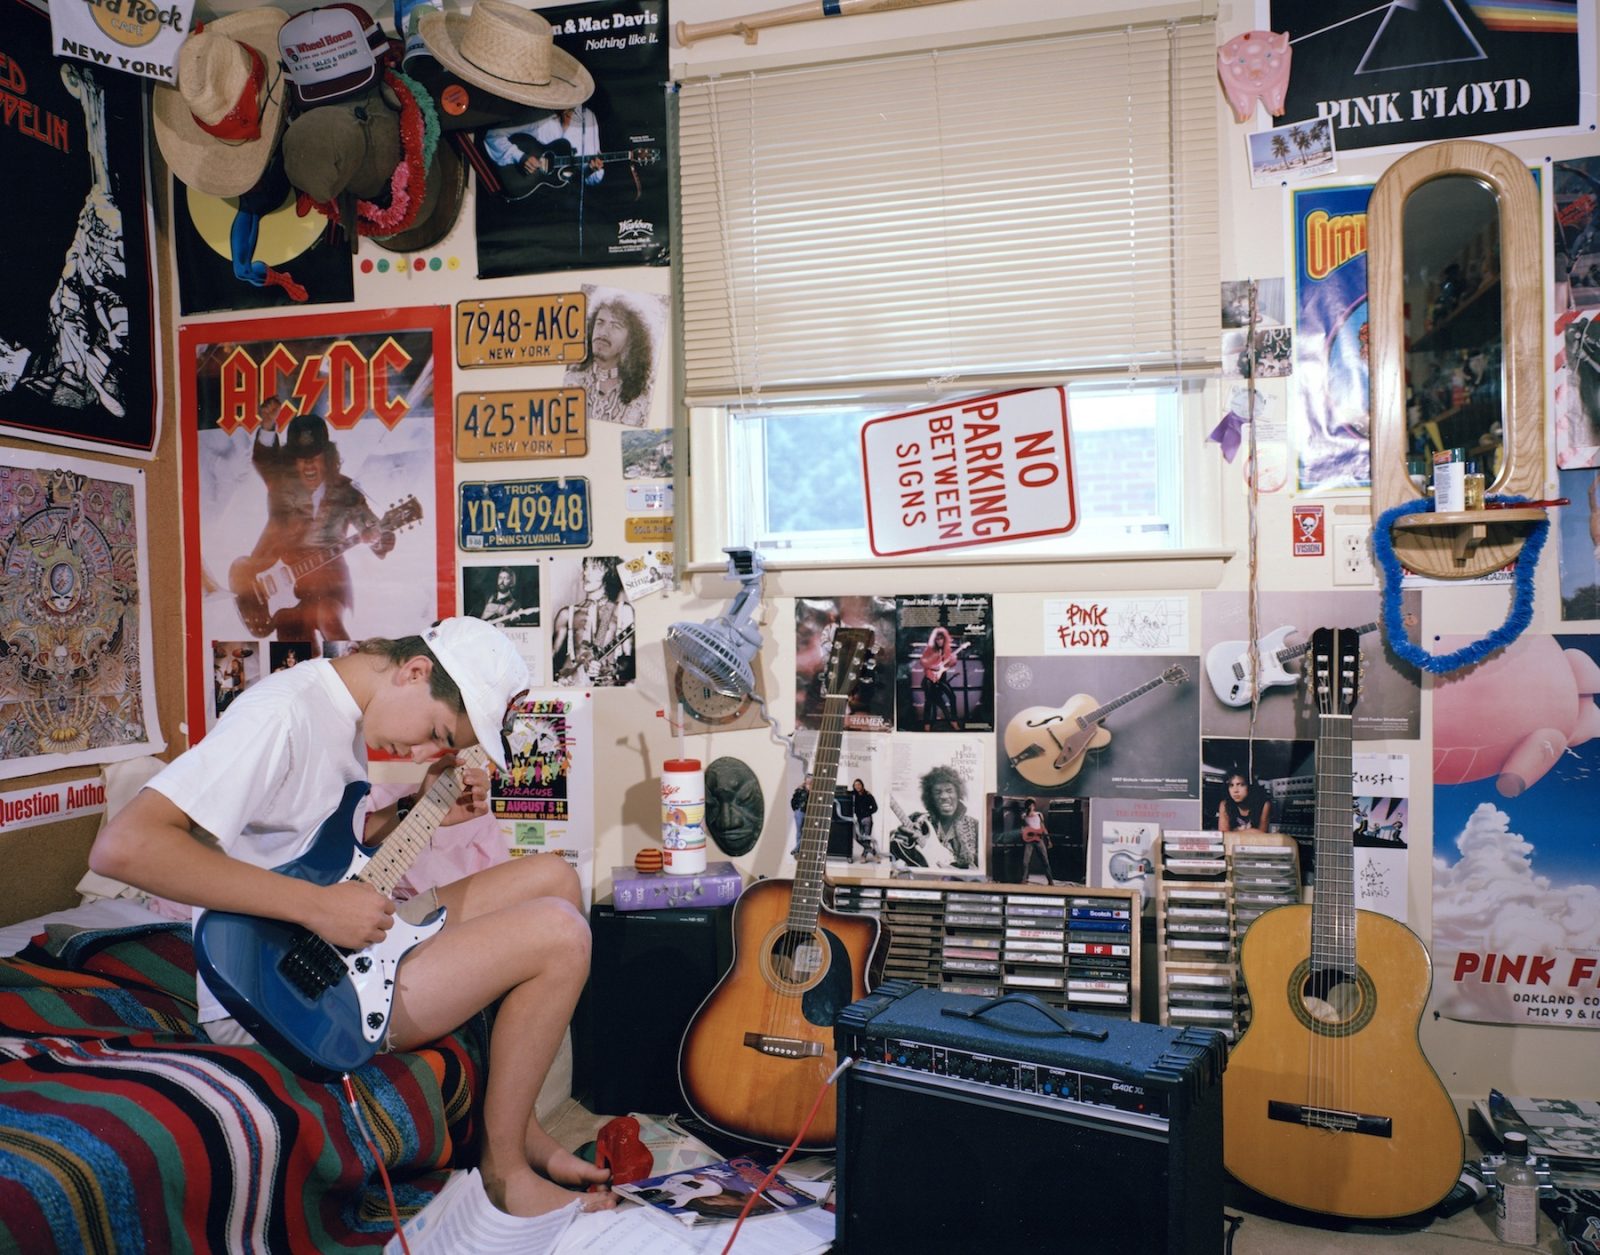 Live a Day in the ’90s to Find Out Where You’ll Be in 20 Years Bedroom posters